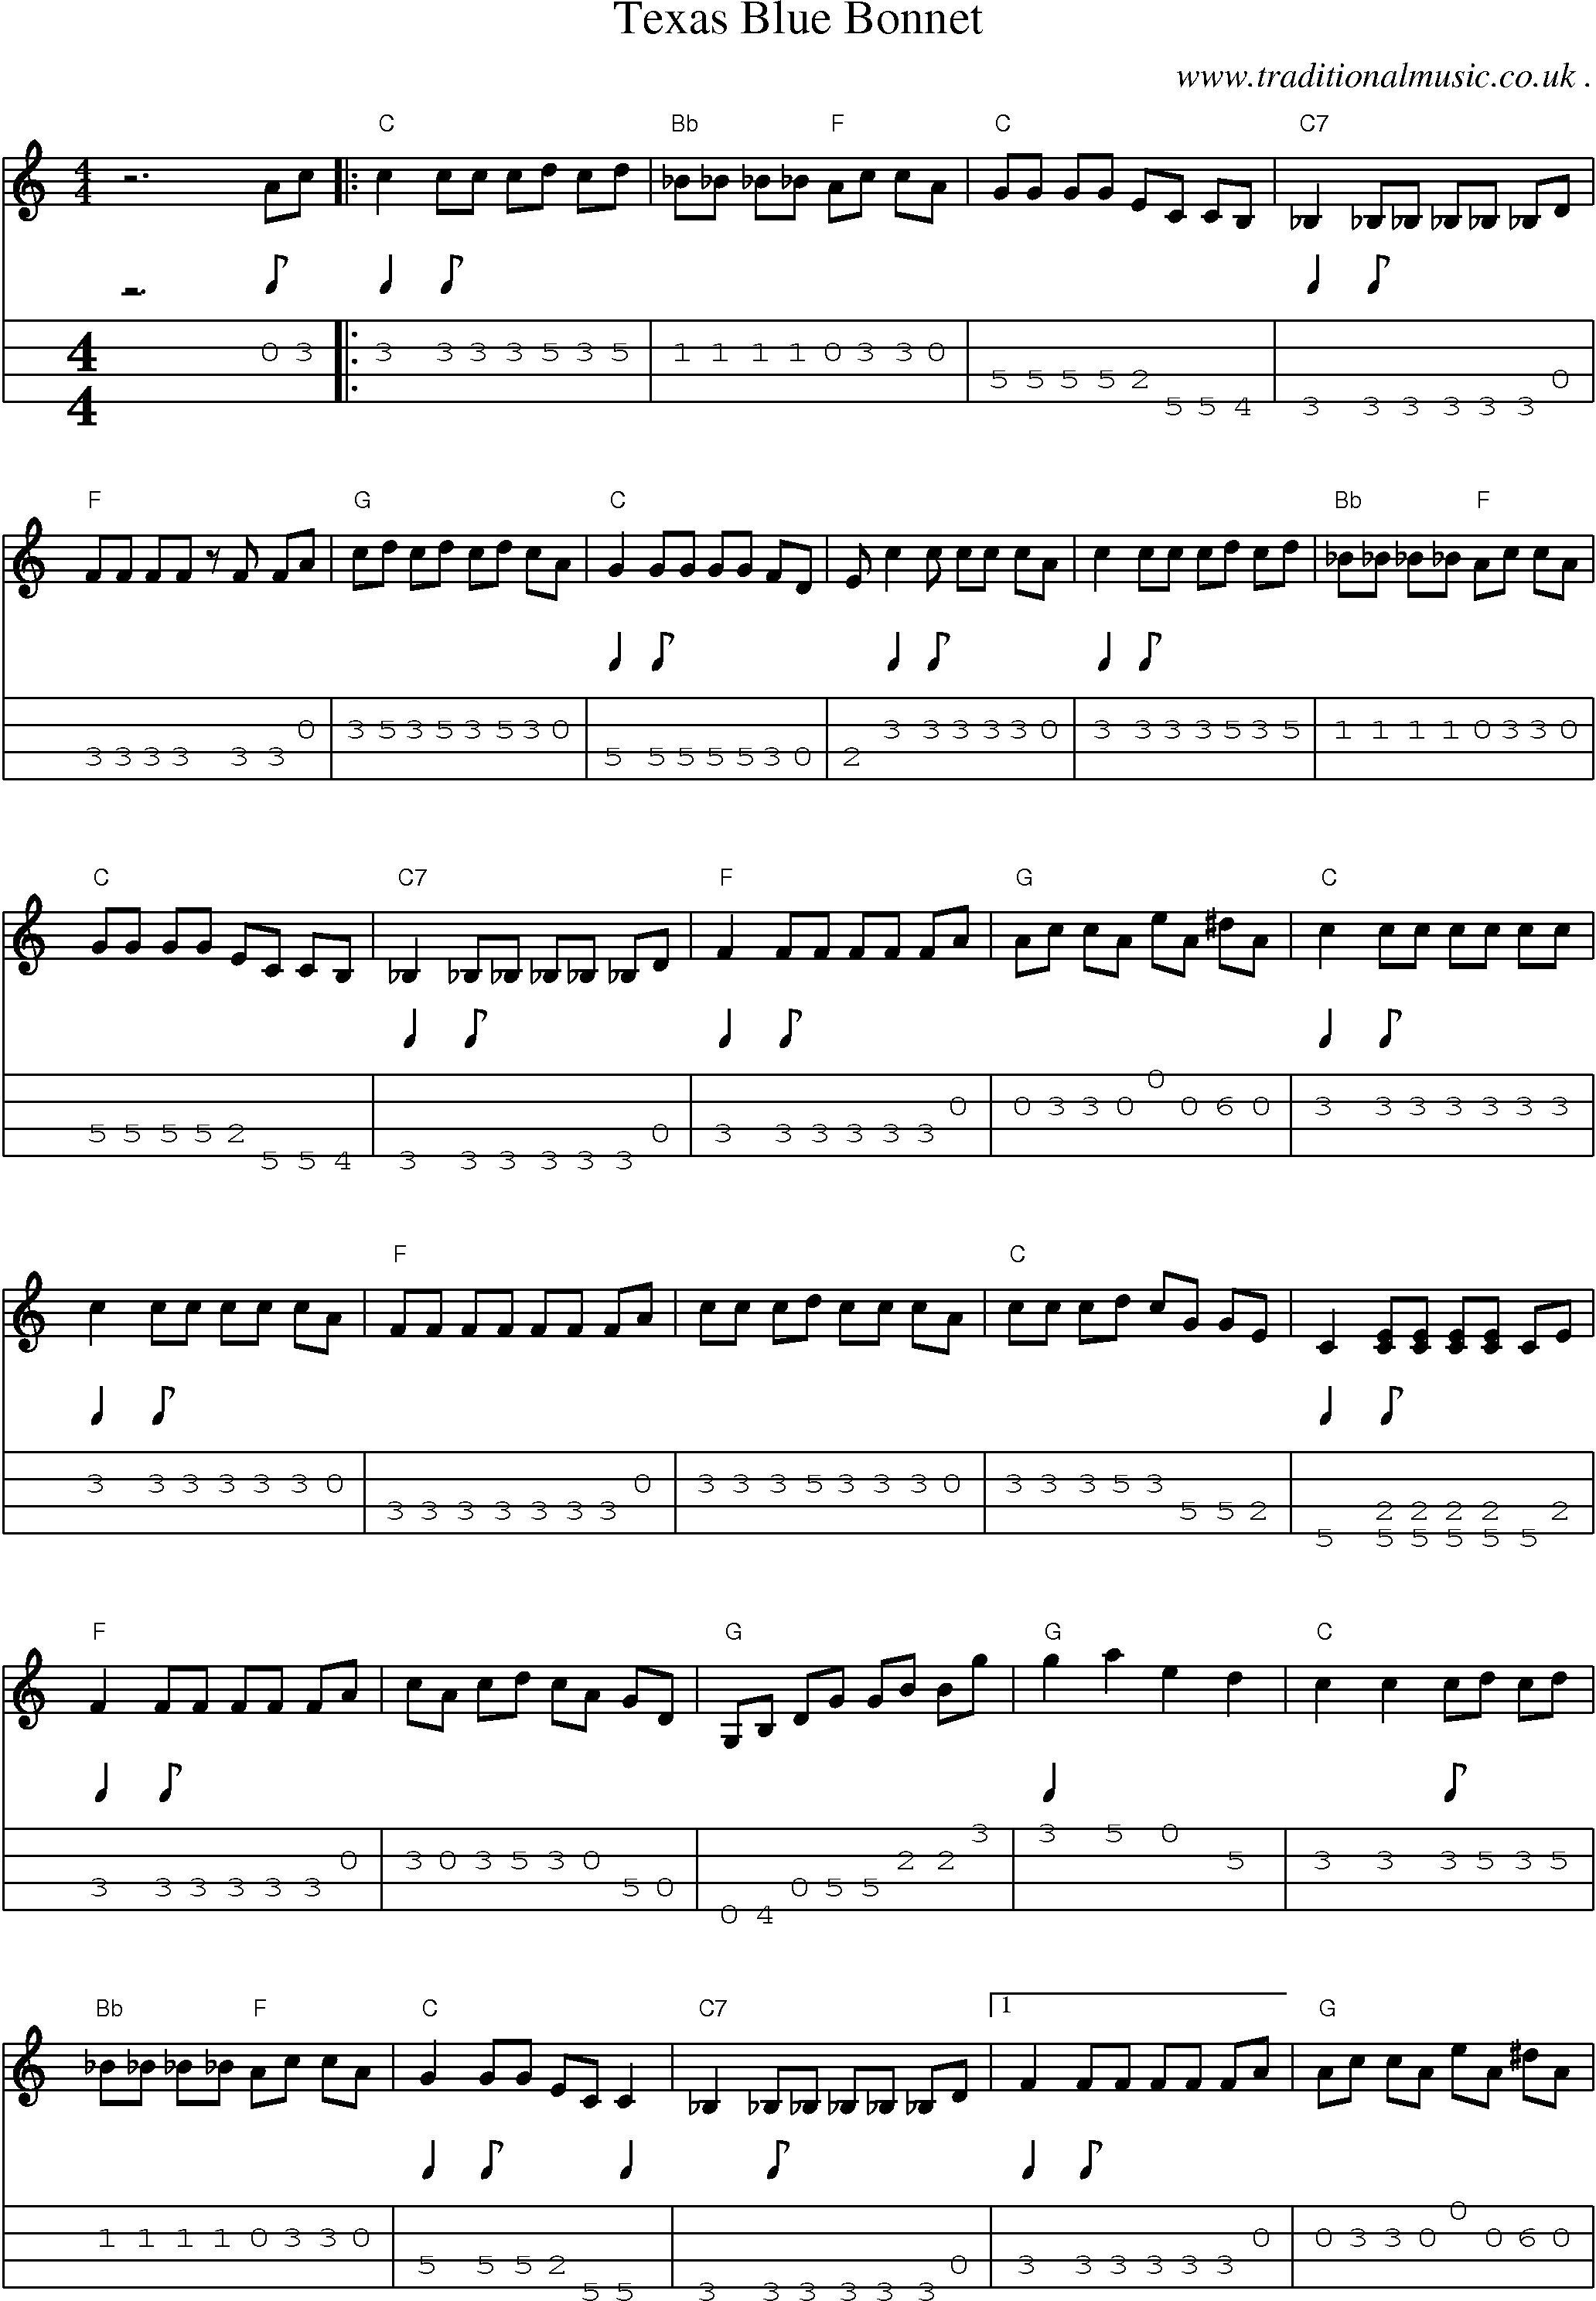 Music Score and Mandolin Tabs for Texas Blue Bonnet